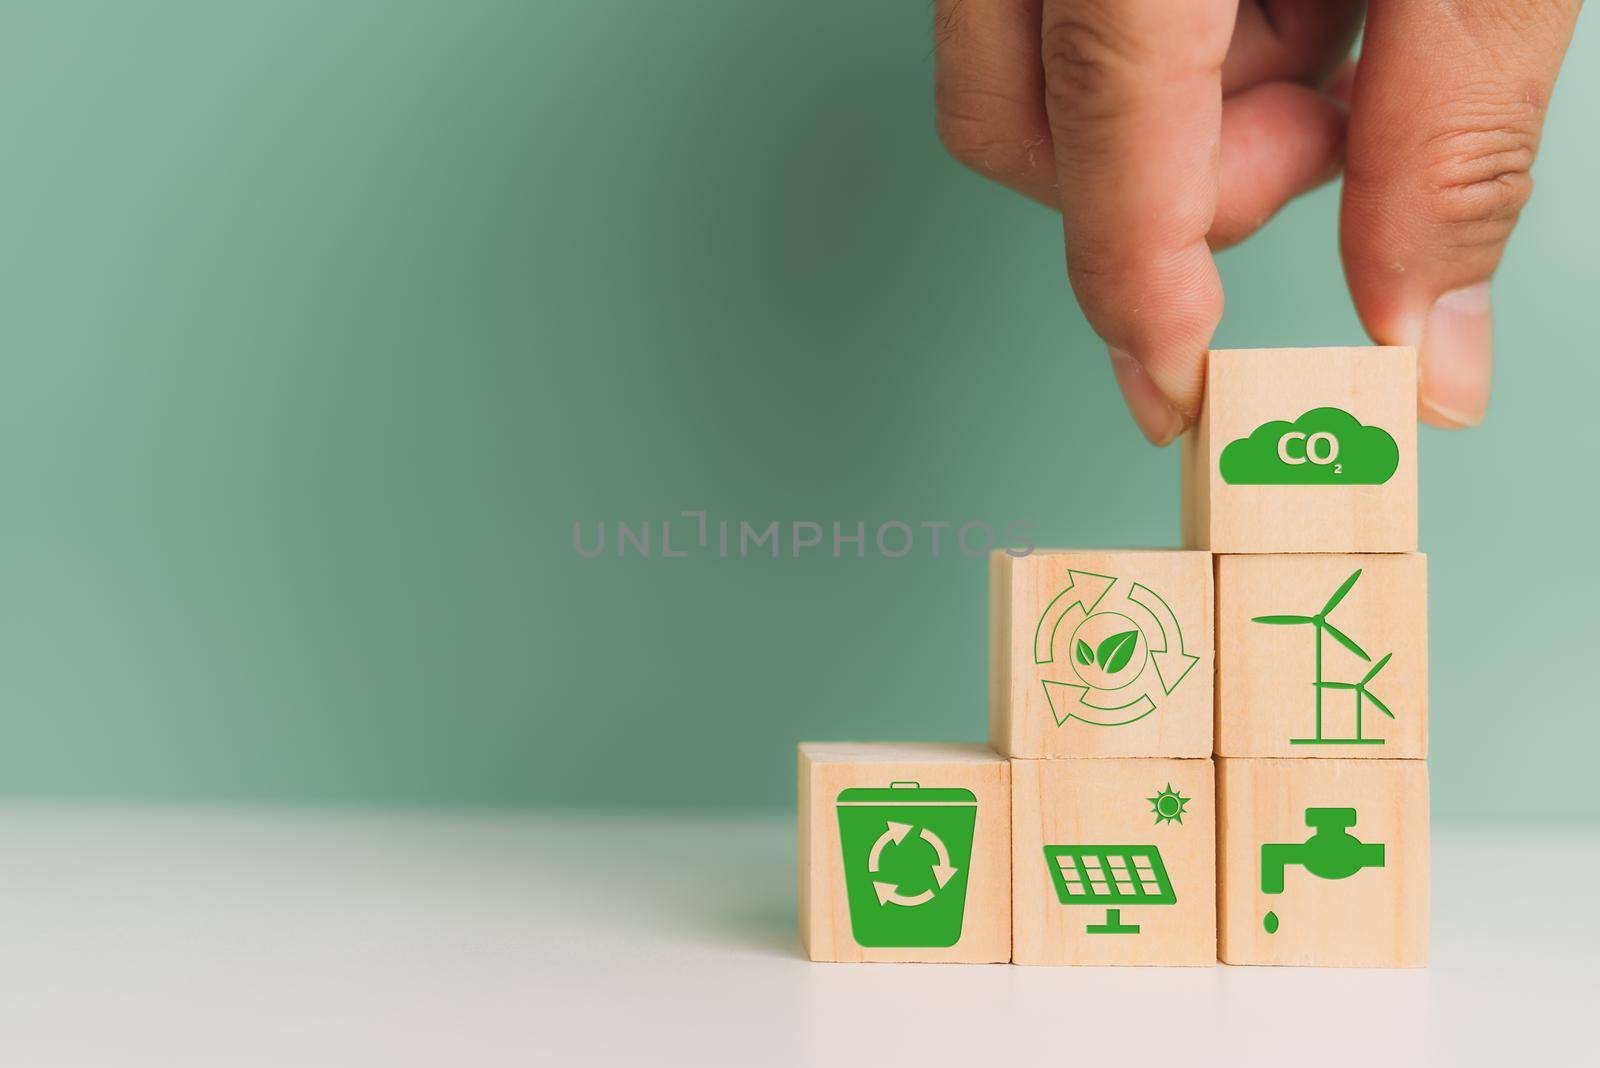 carbon credit net zero green technology eco industry strategy target business concept for environmental development. wood cube block icon on background. by aoo3771